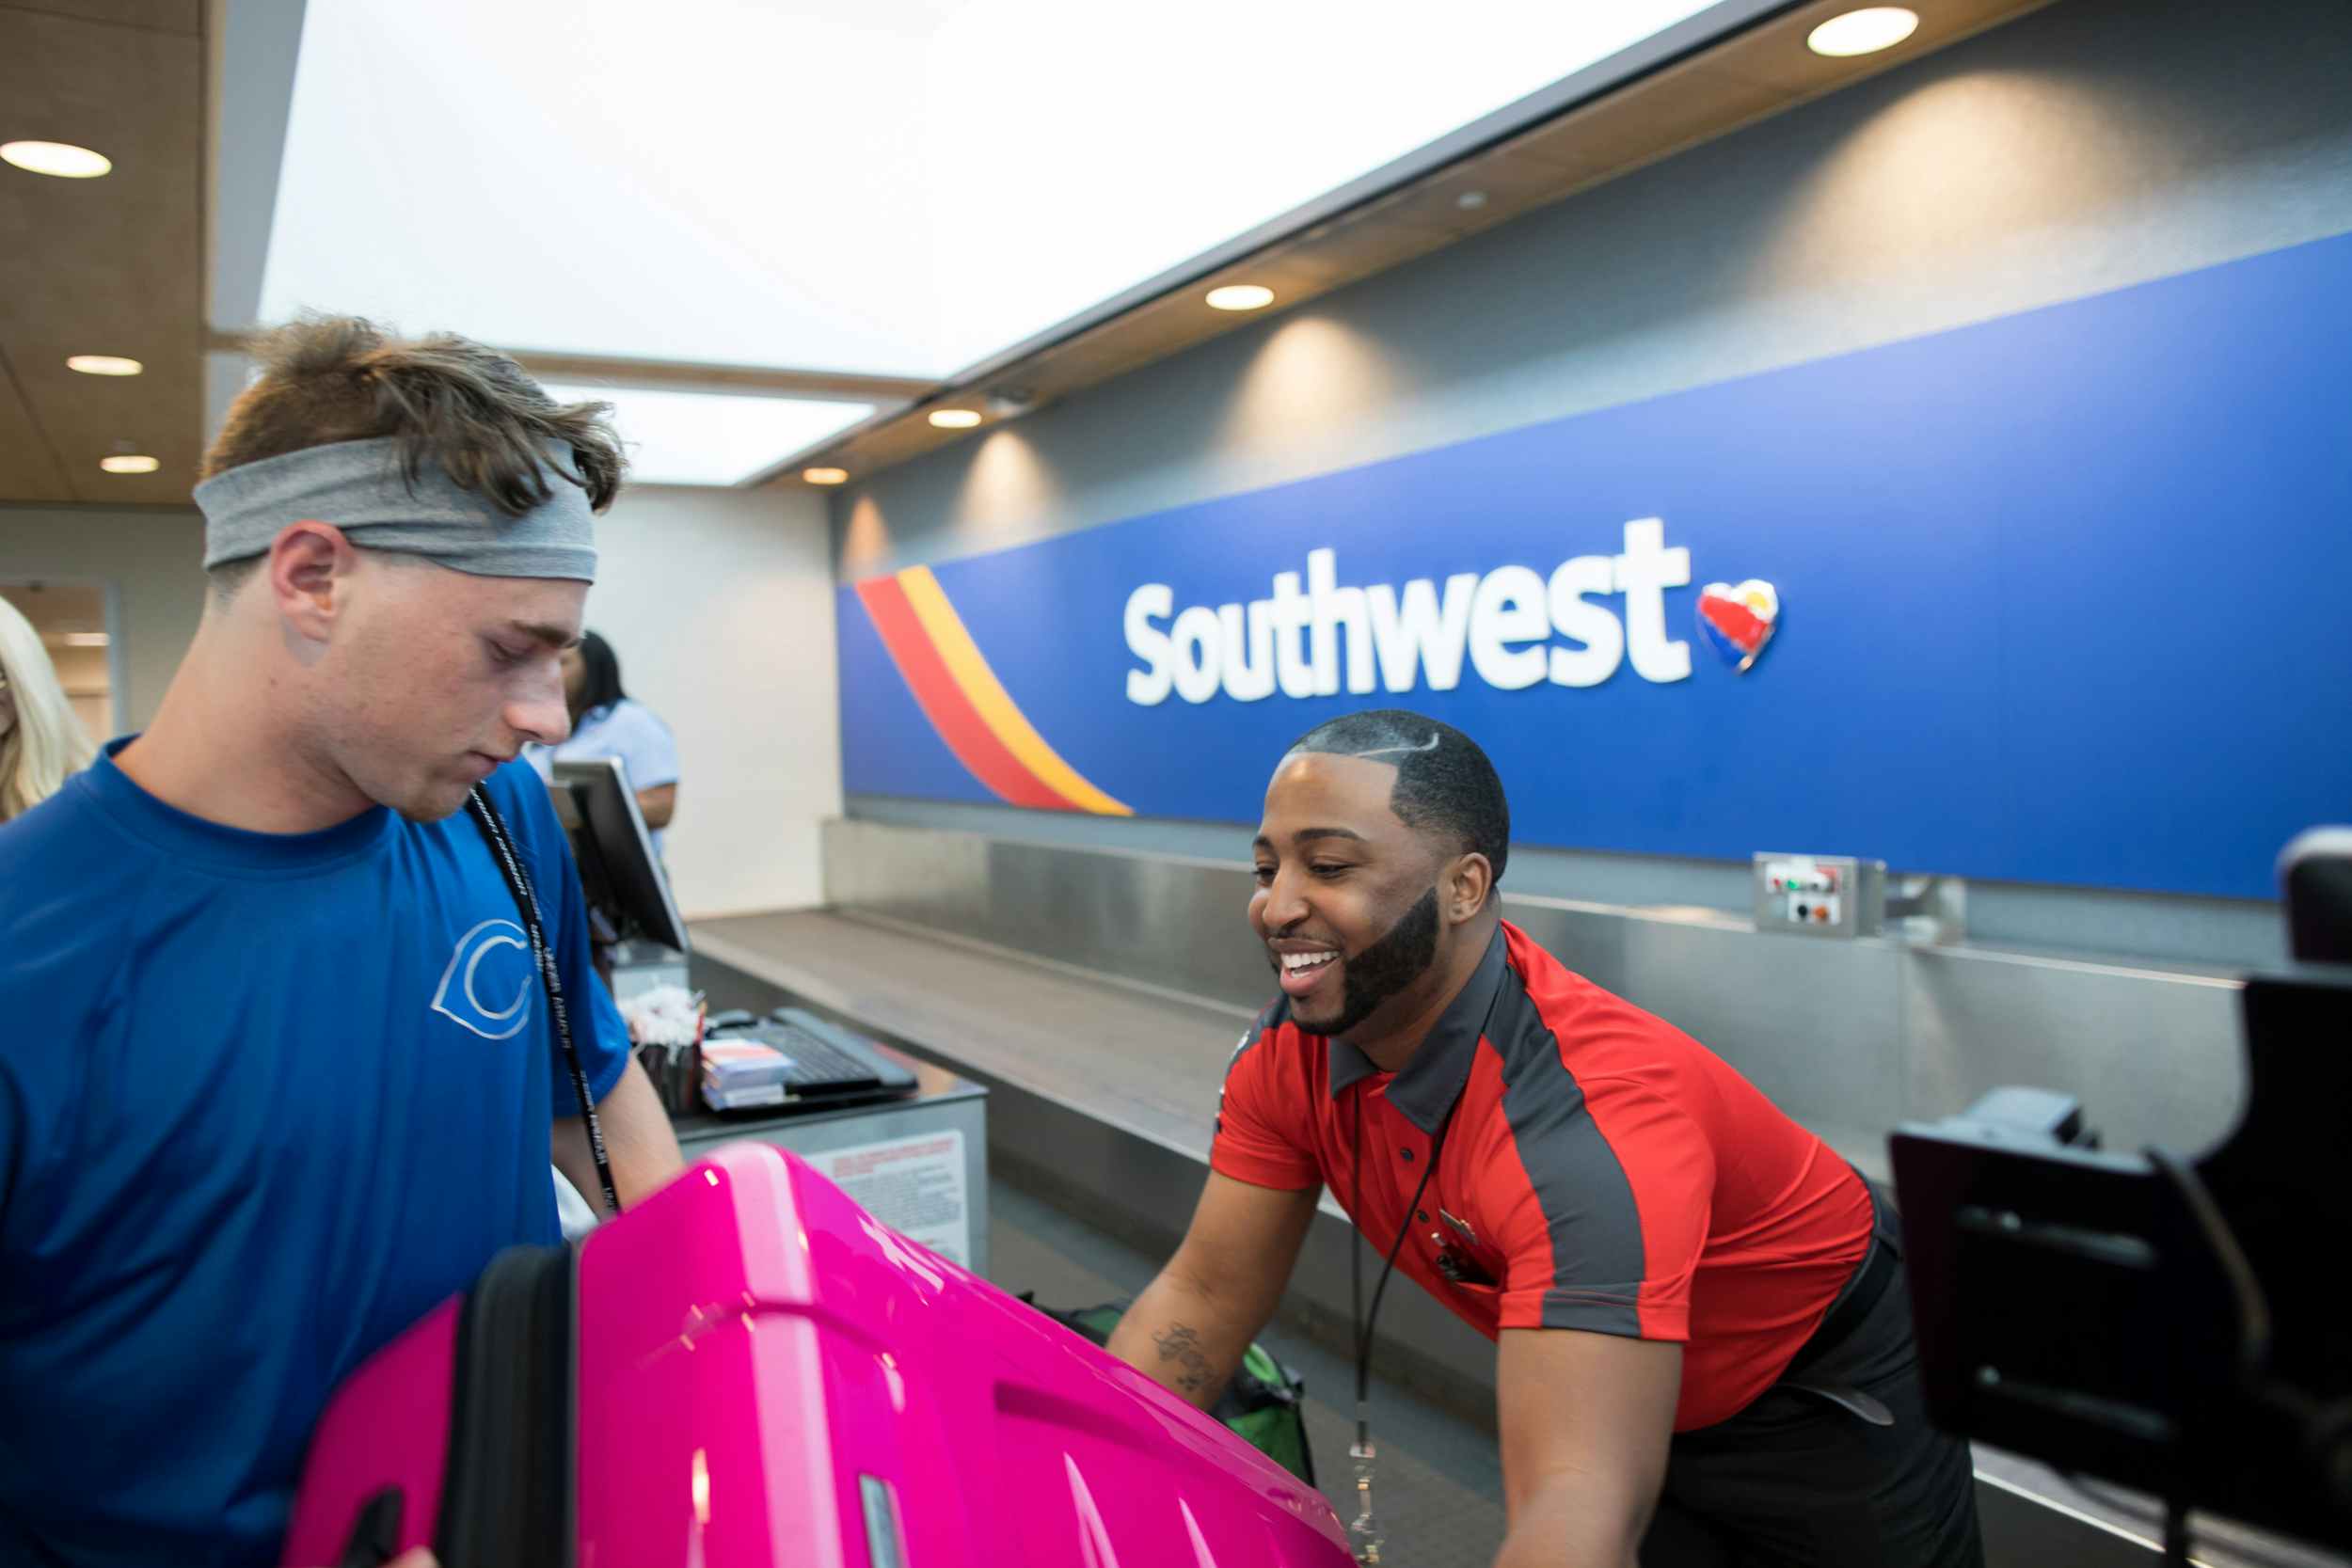 southwest employee at check-in gate taking luggage from passenger